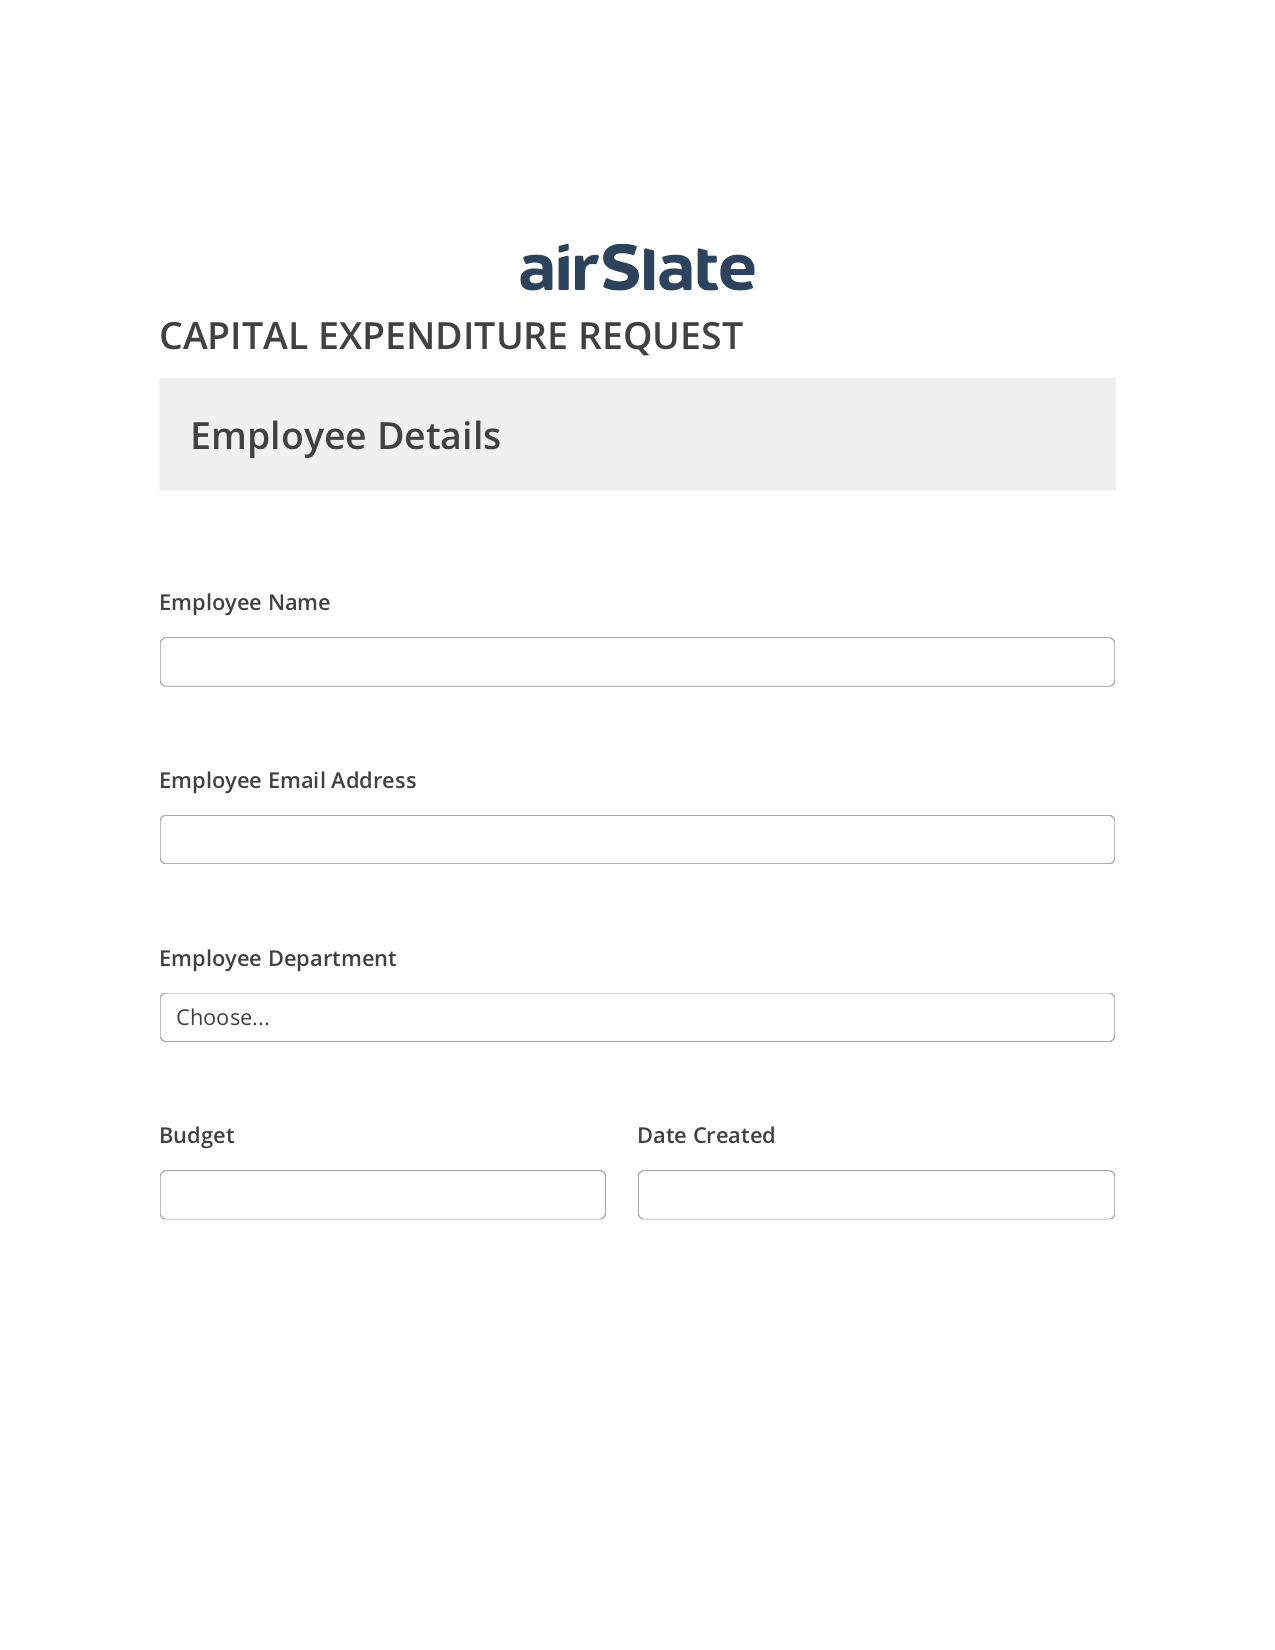 Capital Expenditure Request Approval Workflow Pre-fill from CSV File Bot, Remove Slate Bot, Export to Google Sheet